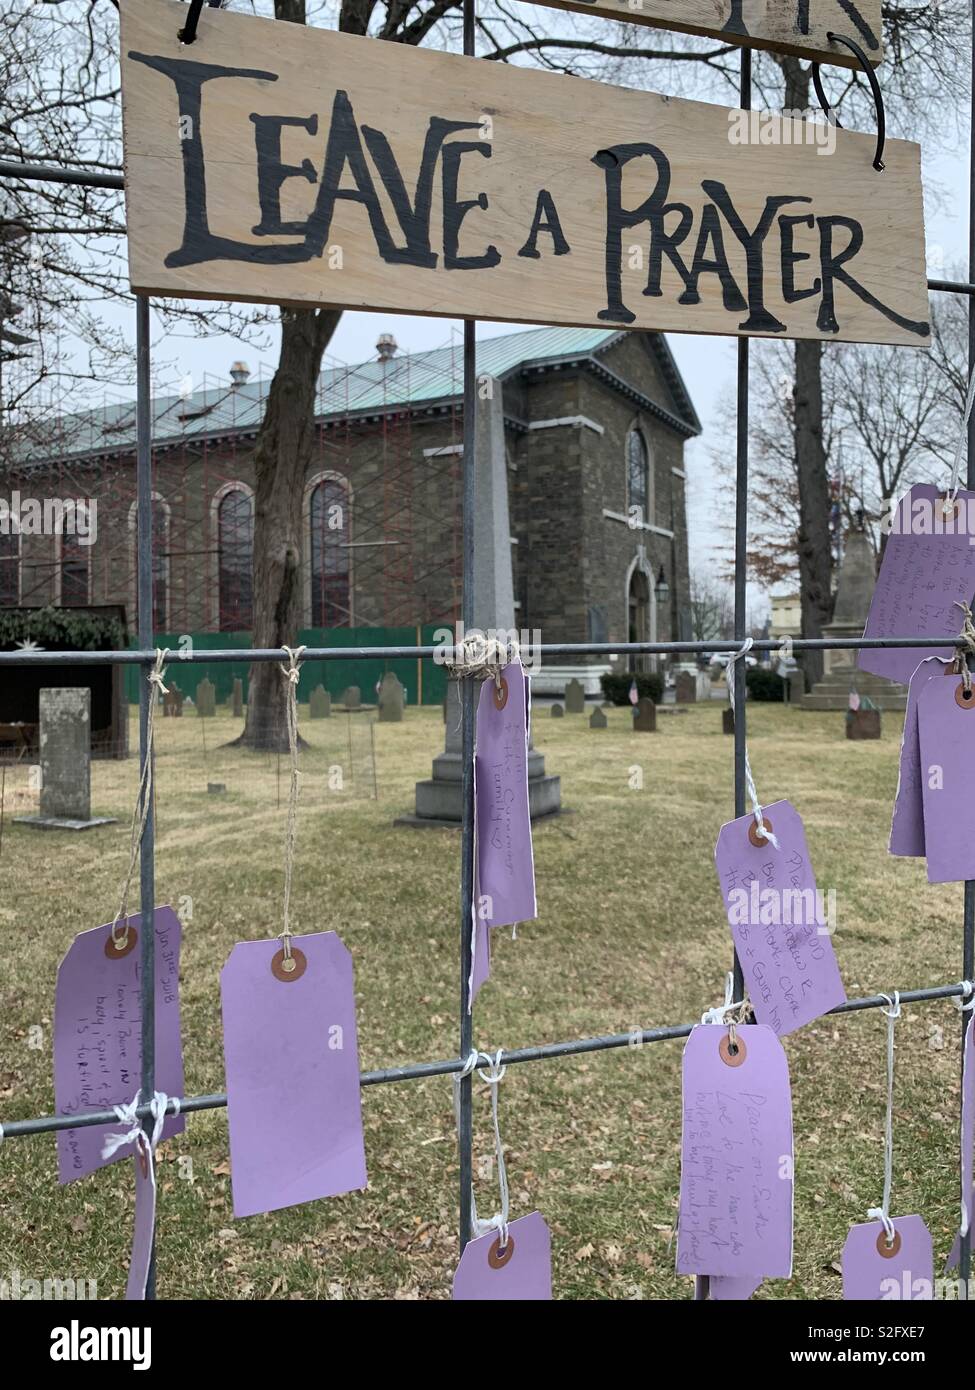 Leave a pray church and cemetery Stock Photo